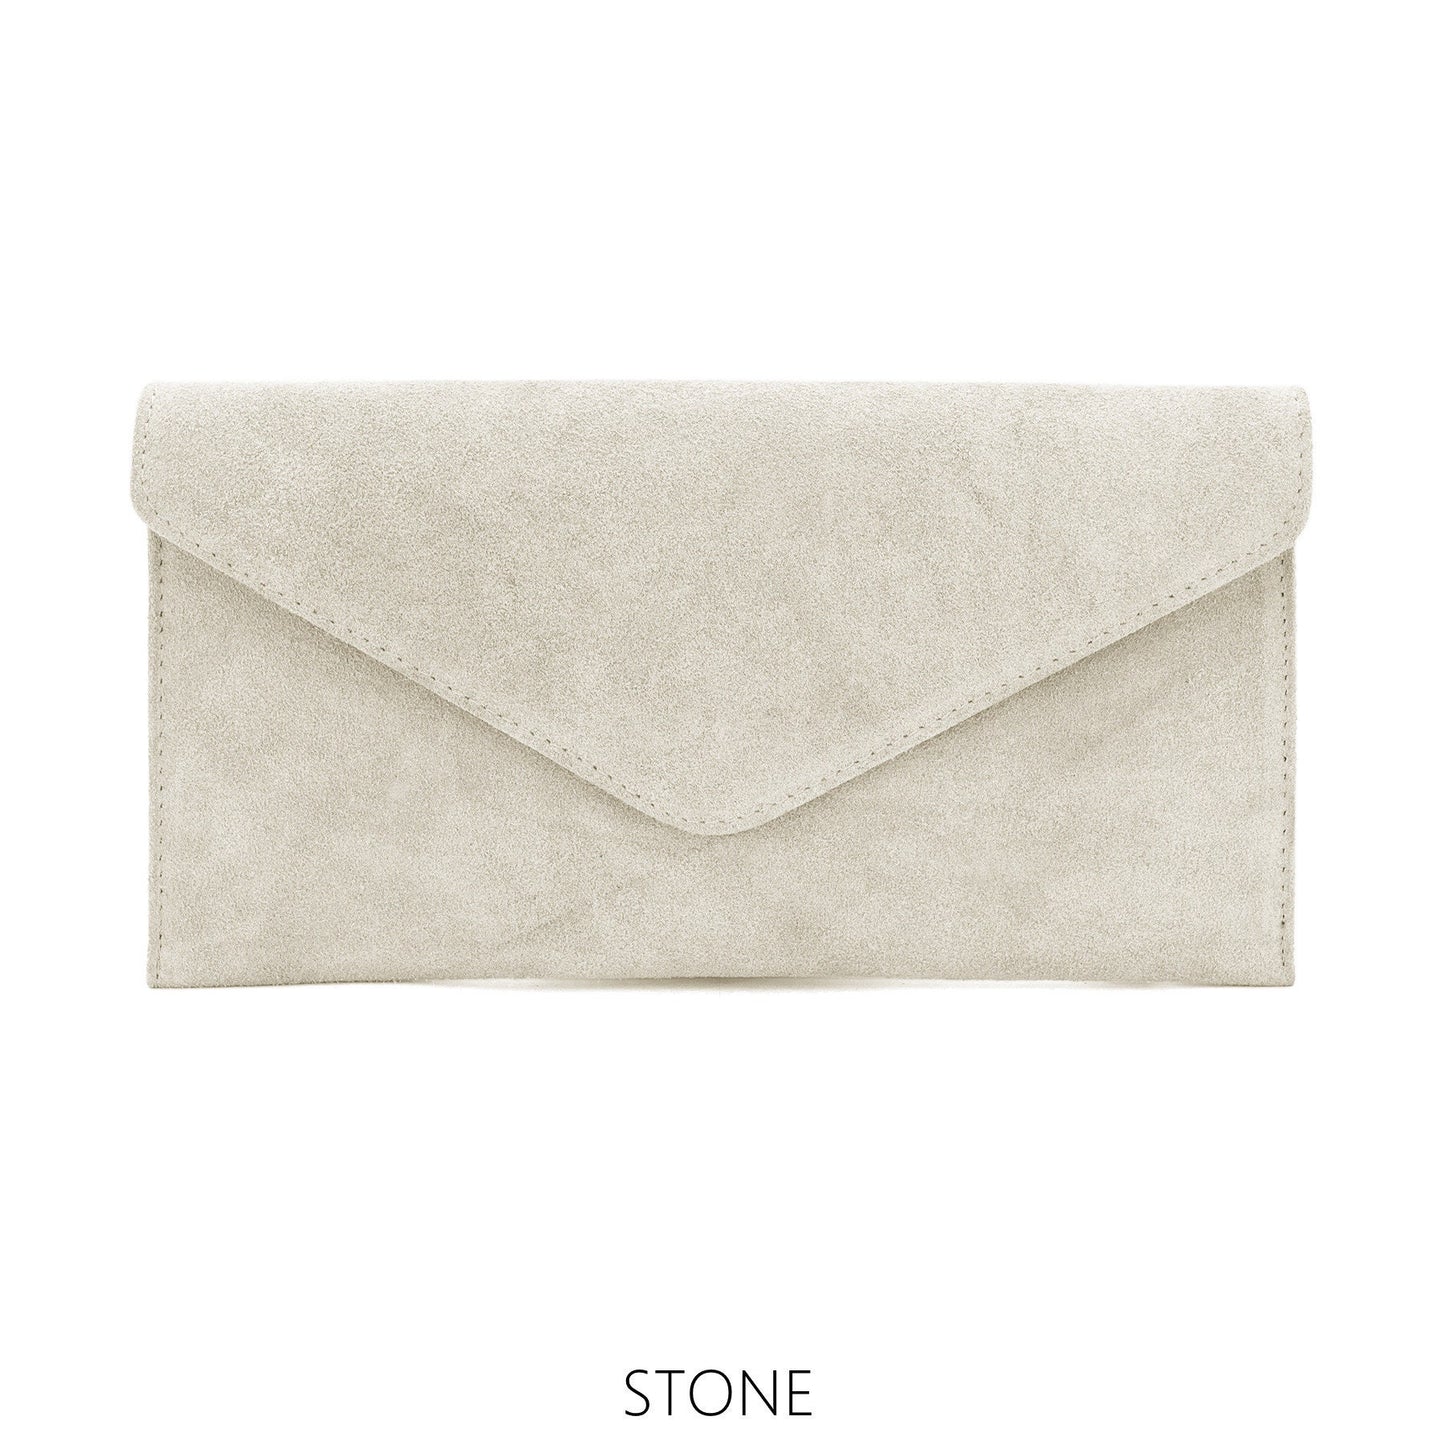 Stone Suede Leather Envelope Clutch Bag